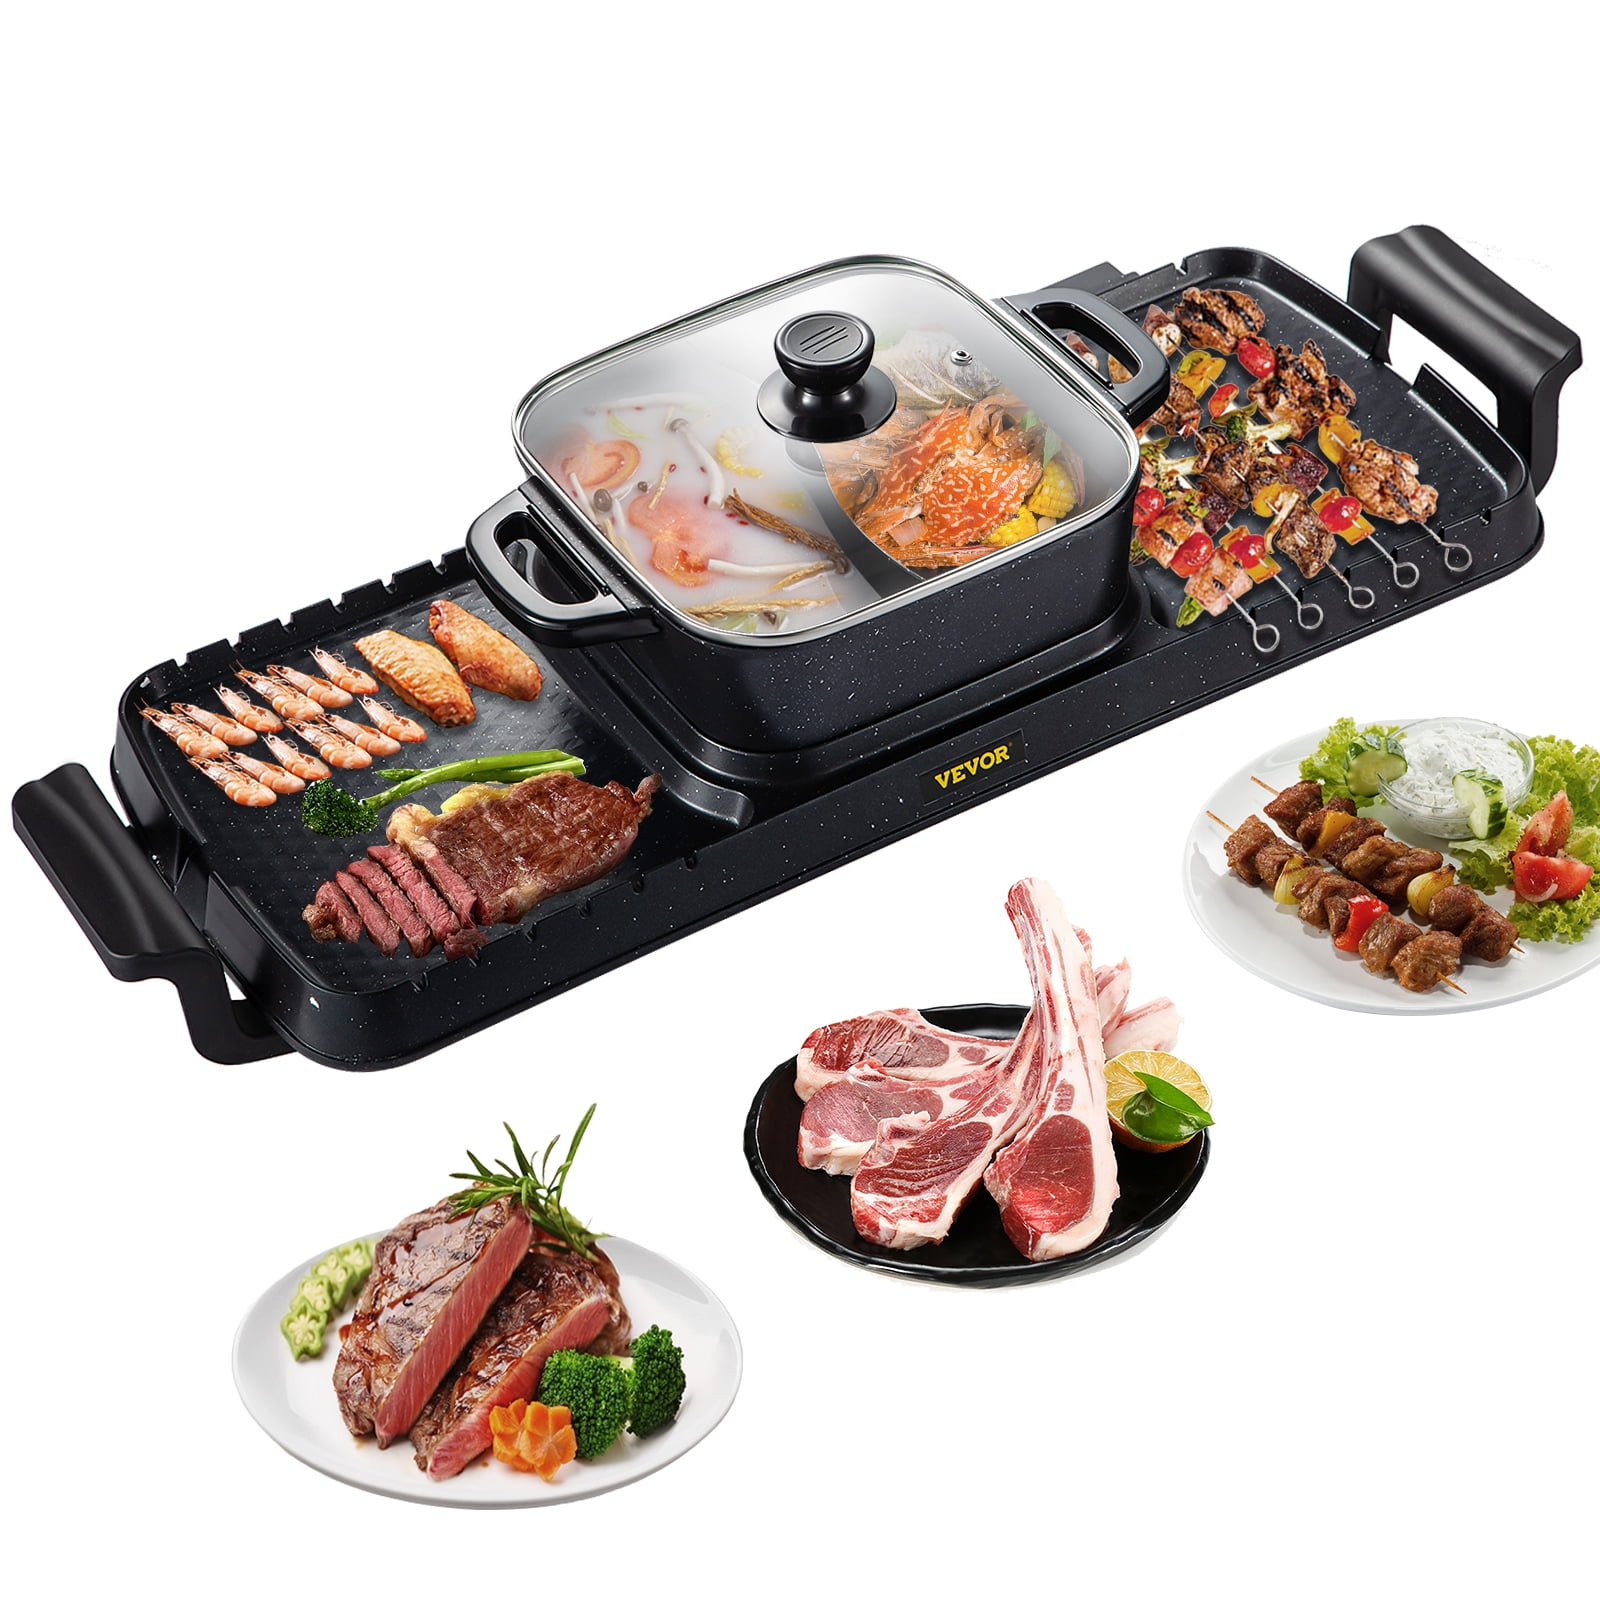 VEVOR VEVOR 2 in 1 BBQ Pan Grill and Hot Pot with Divider